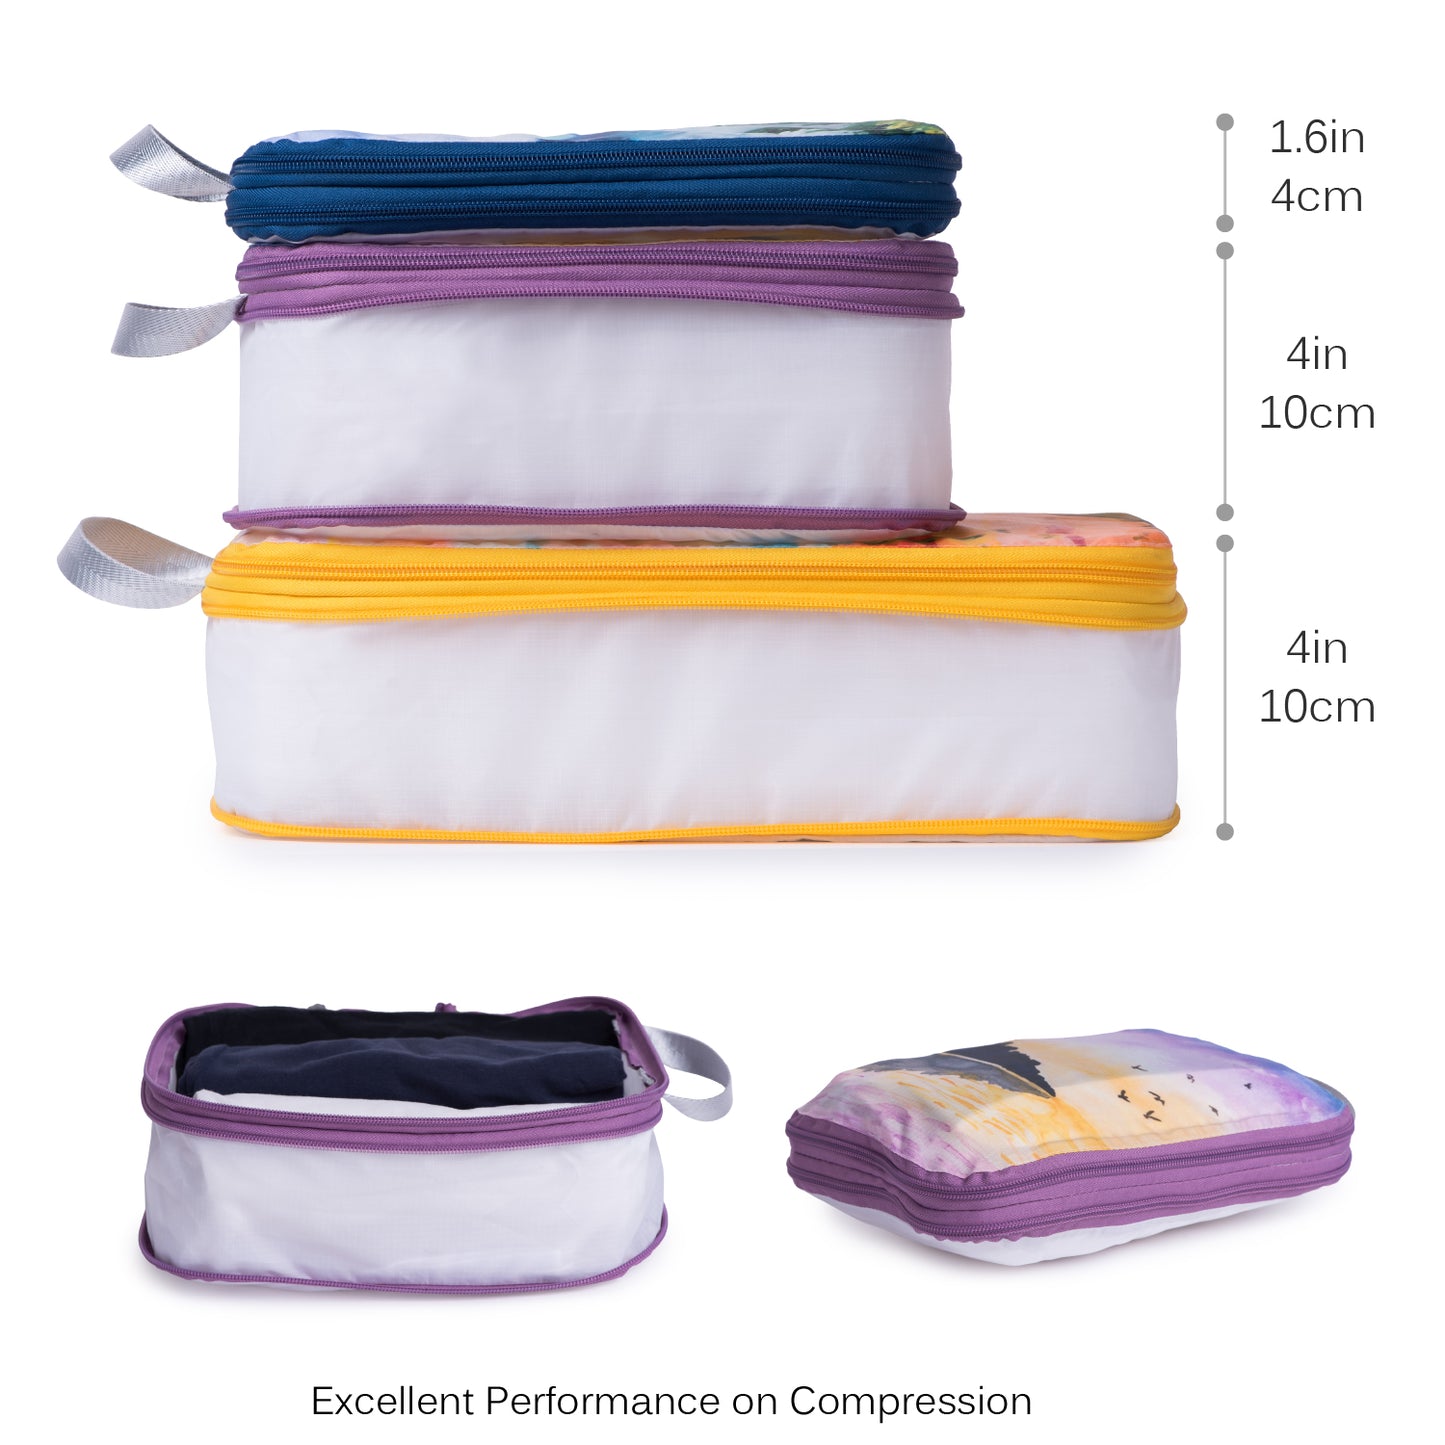 Packing Cube Set of 3 for Travel, Compression Bags Organizer for Luggage / Backpack, Painting